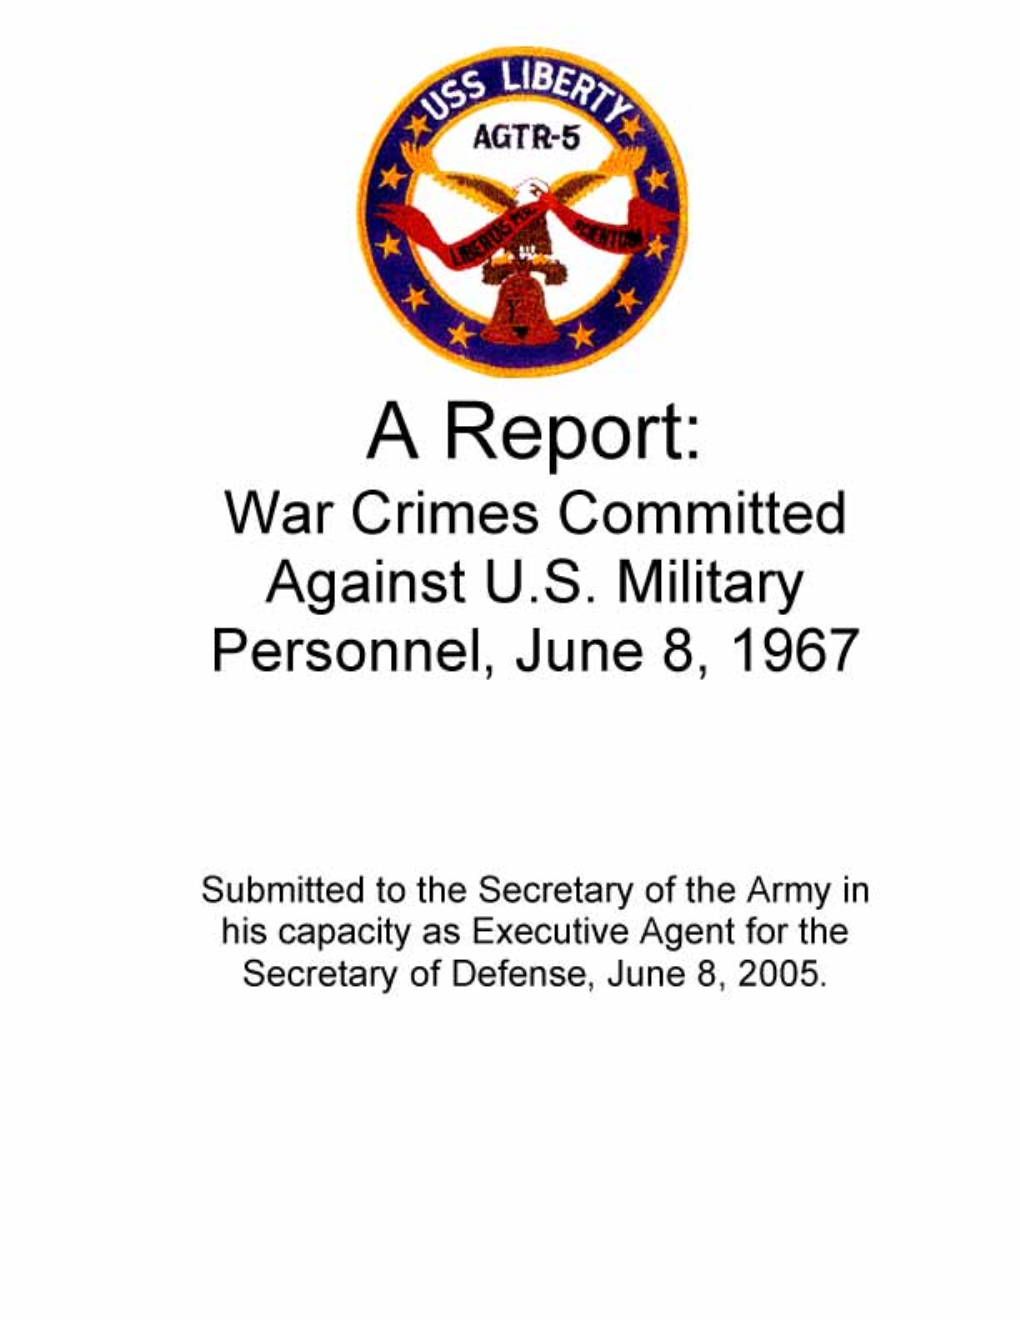 Report of War Crimes Committed Against U.S